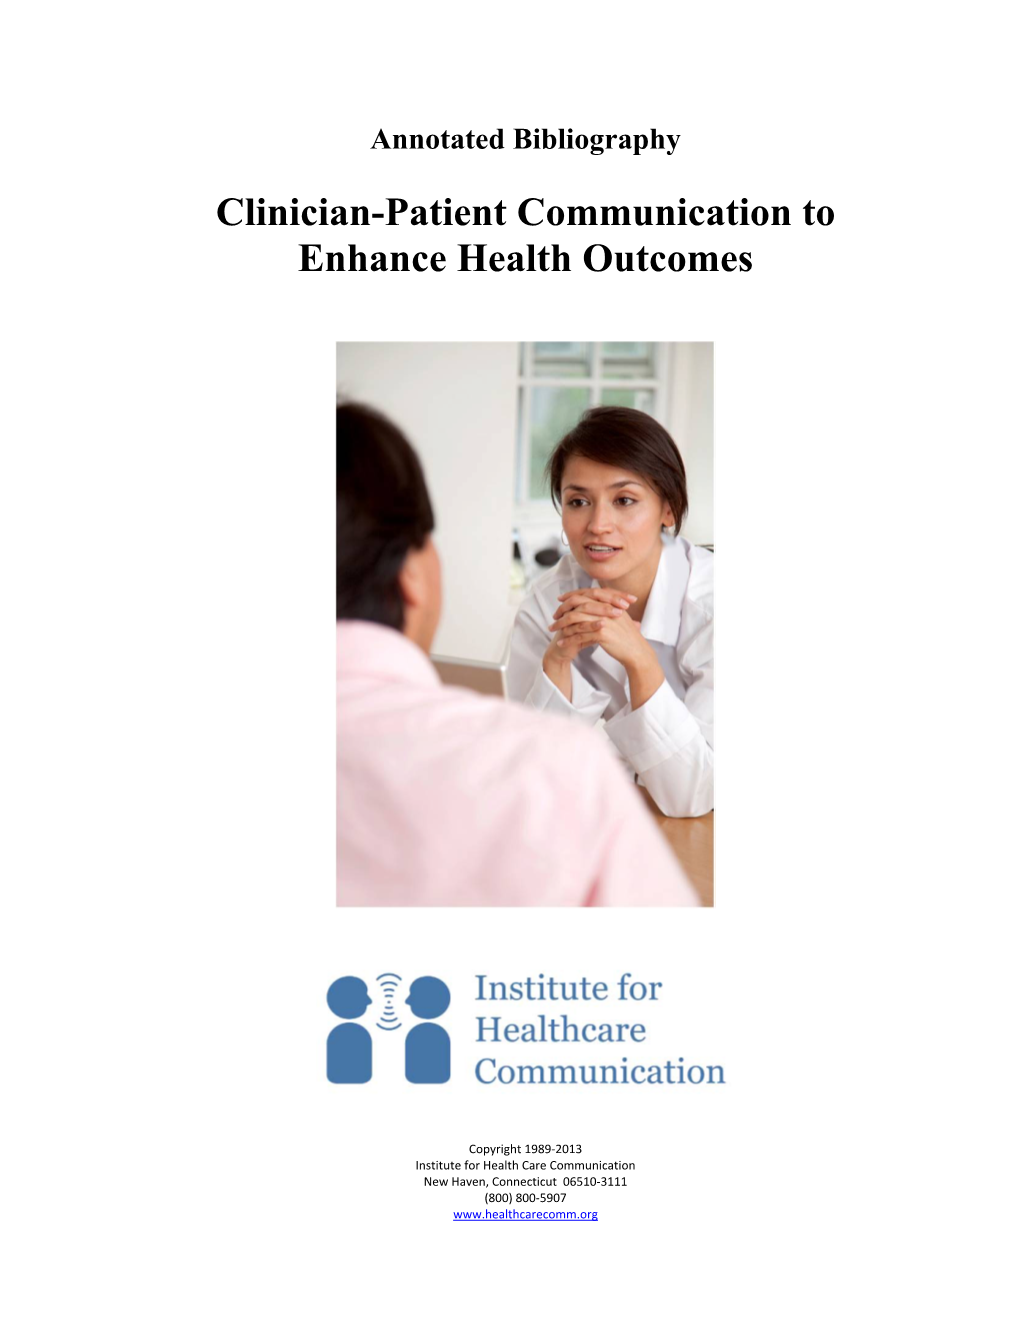 Clinician-Patient Communication to Enhance Health Outcomes